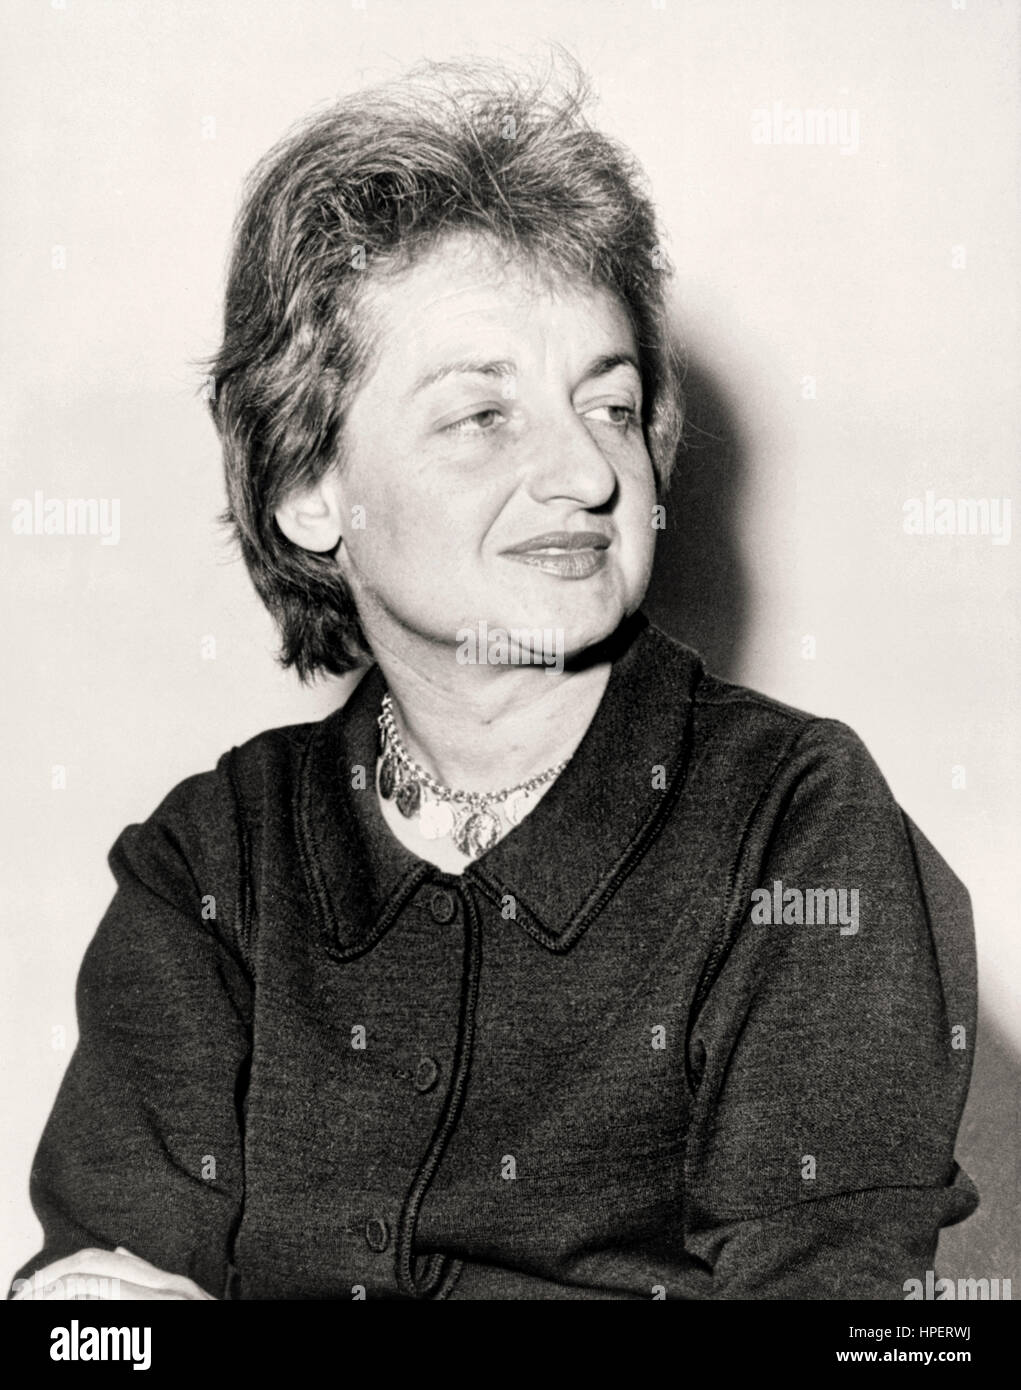 Betty Friedan (1921-2006) American feminist writer and activist, her bestselling book ‘The Feminine Mystique’ published in 1963 paved the way for the second-wave feminist movement in the USA. Stock Photo